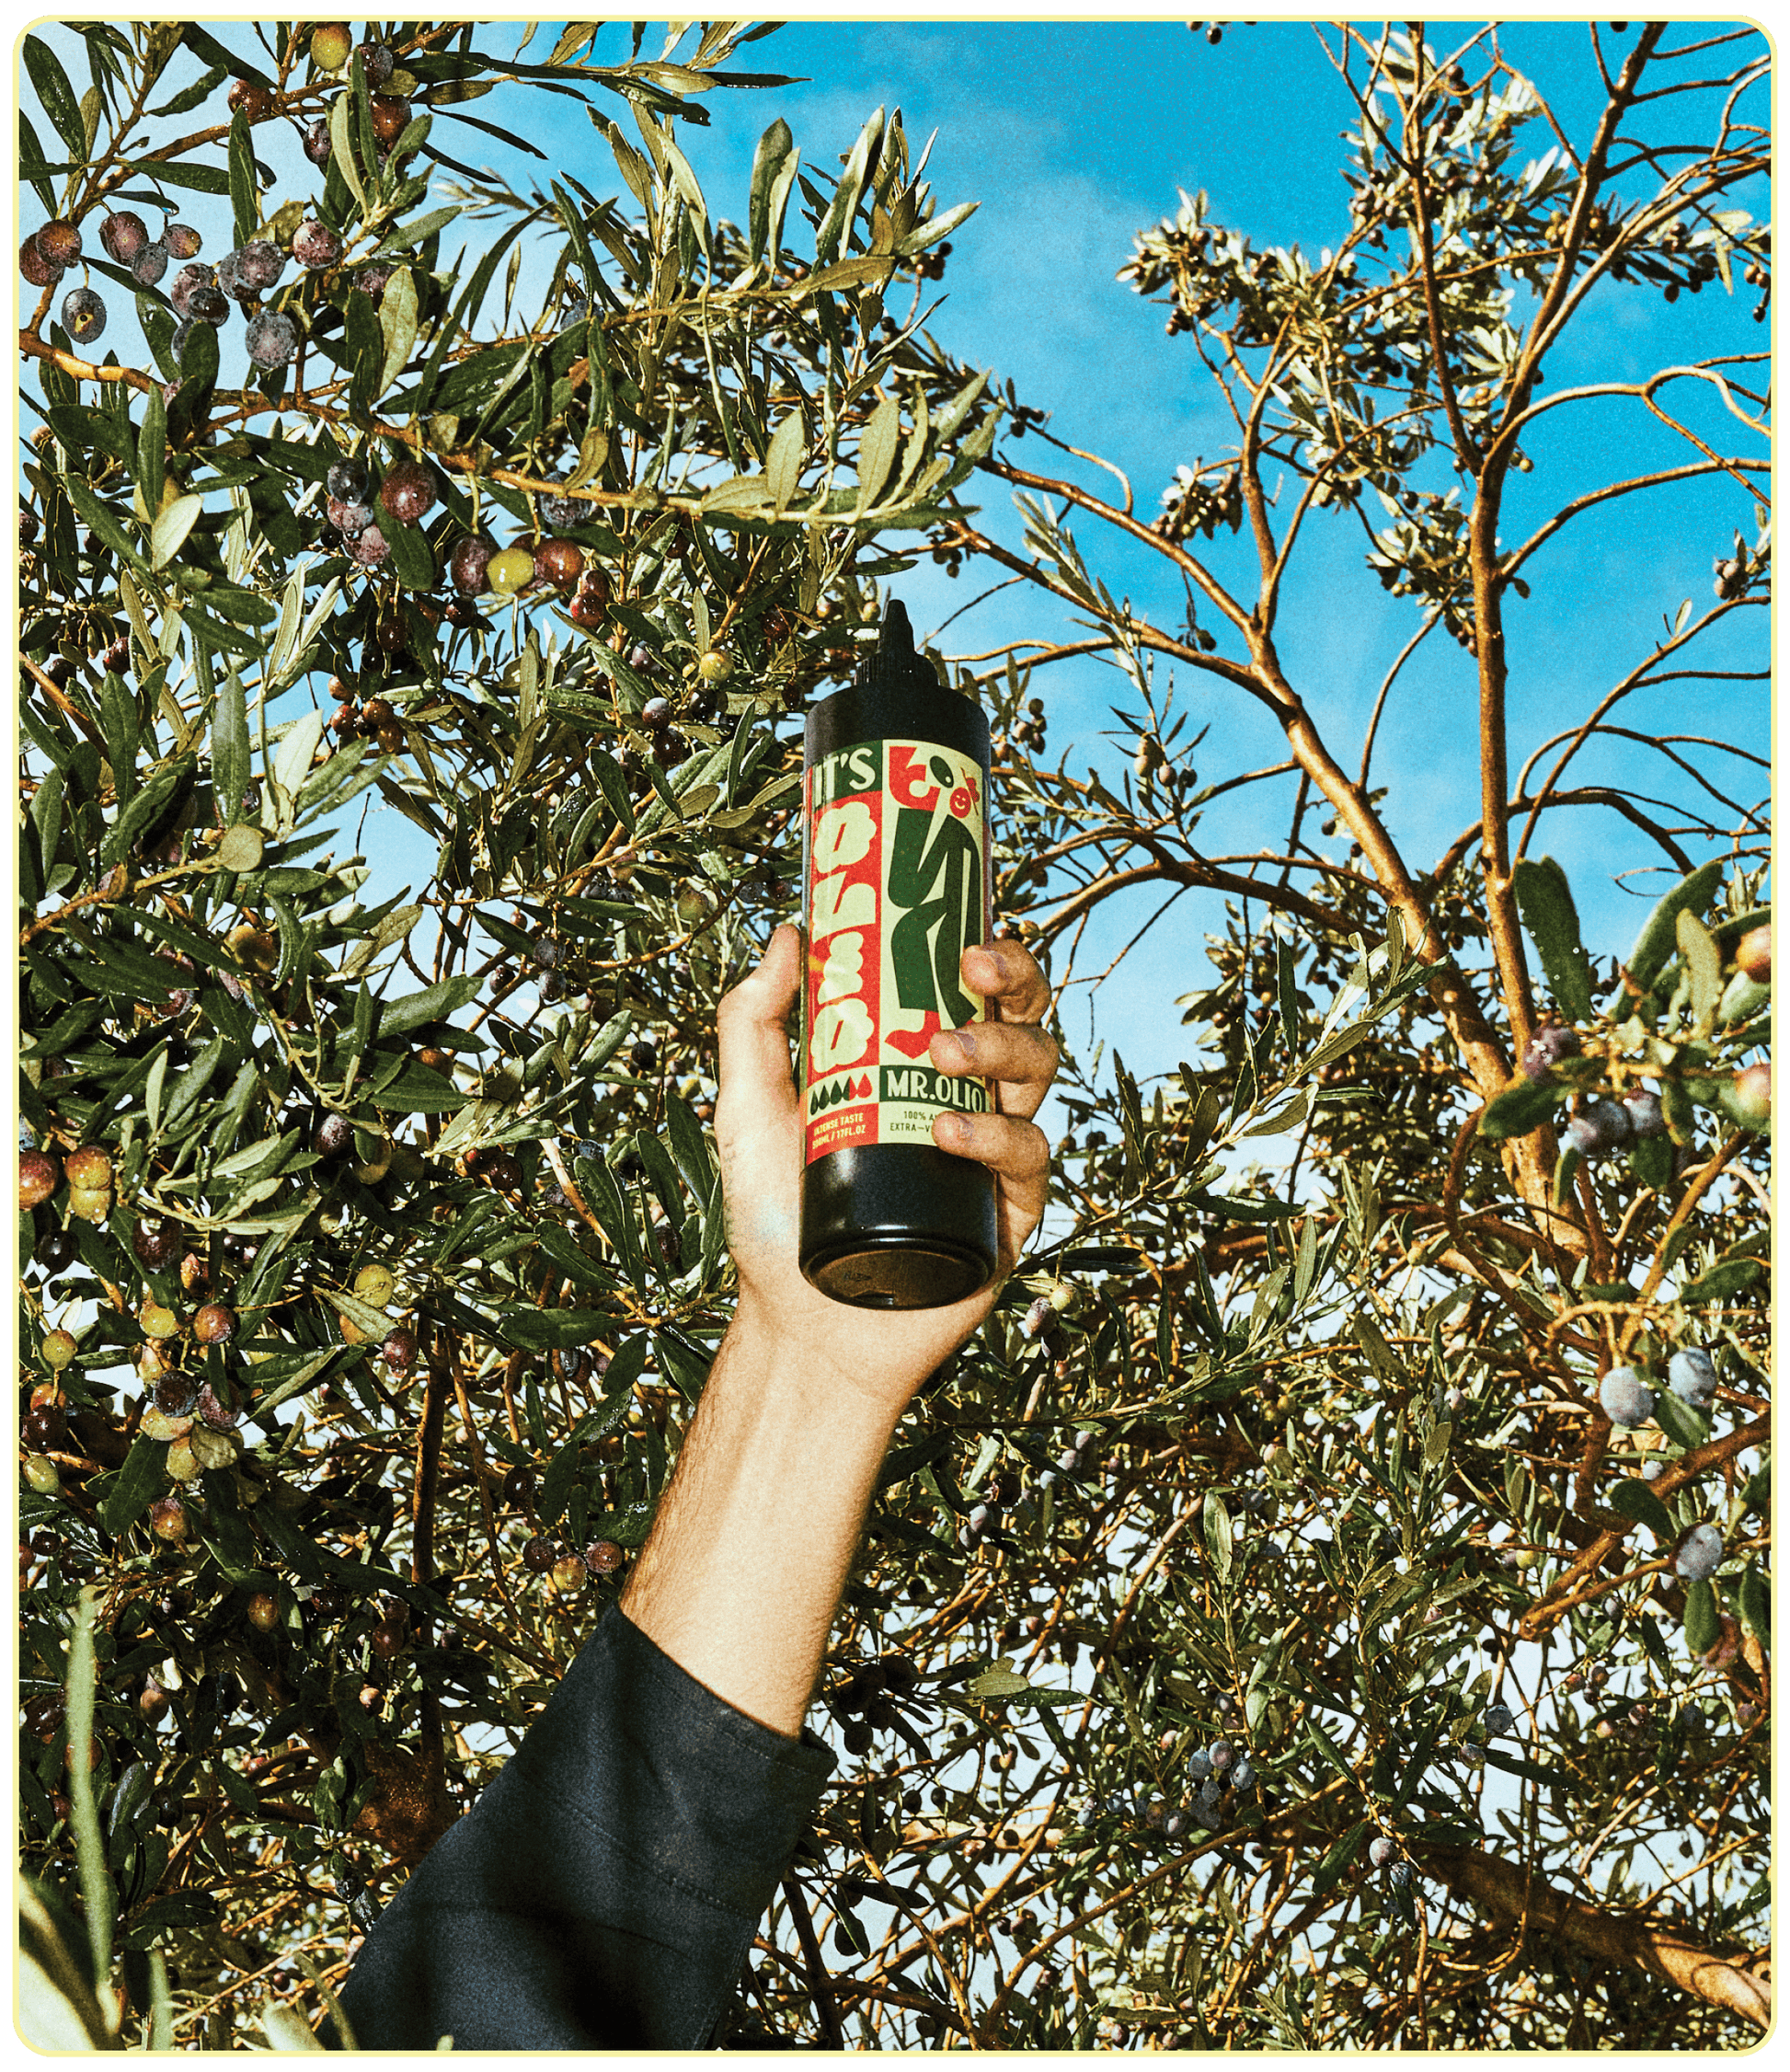 South Australian Handpicked Extra Virgin olive oil. Organic & fresh from the McLaren Vale. Experience Delicious taste from a squeezable bottle.